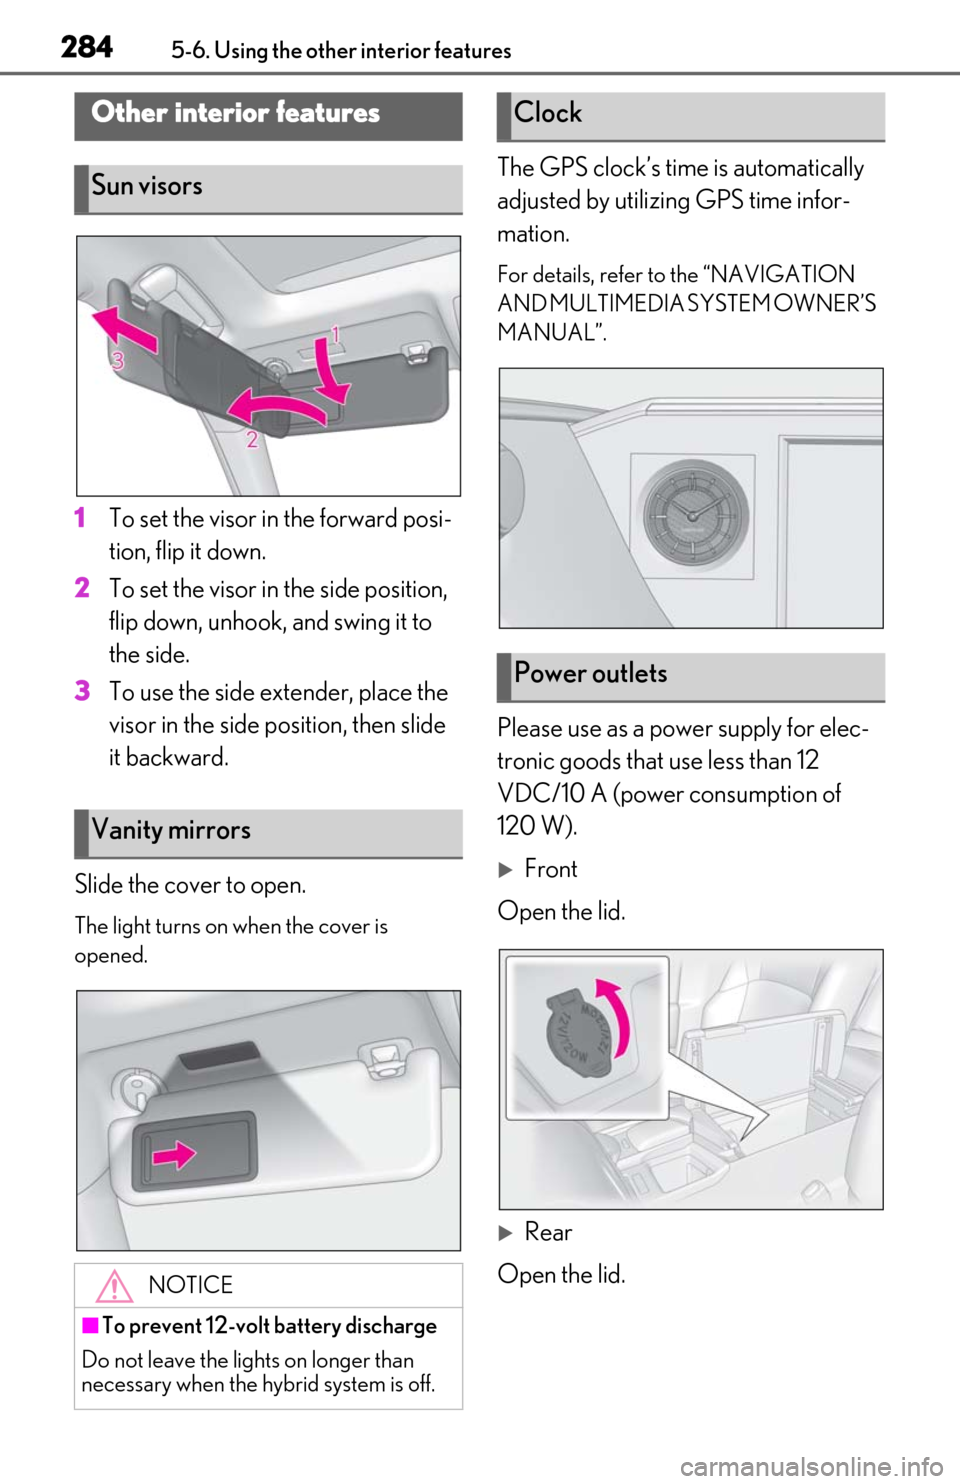 Lexus ES300h 2020  Owners Manual 2845-6. Using the other interior features
5-6.Using the other interior features
1To set the visor in the forward posi-
tion, flip it down.
2
To set the visor in the side position, 
flip down, unhook, 